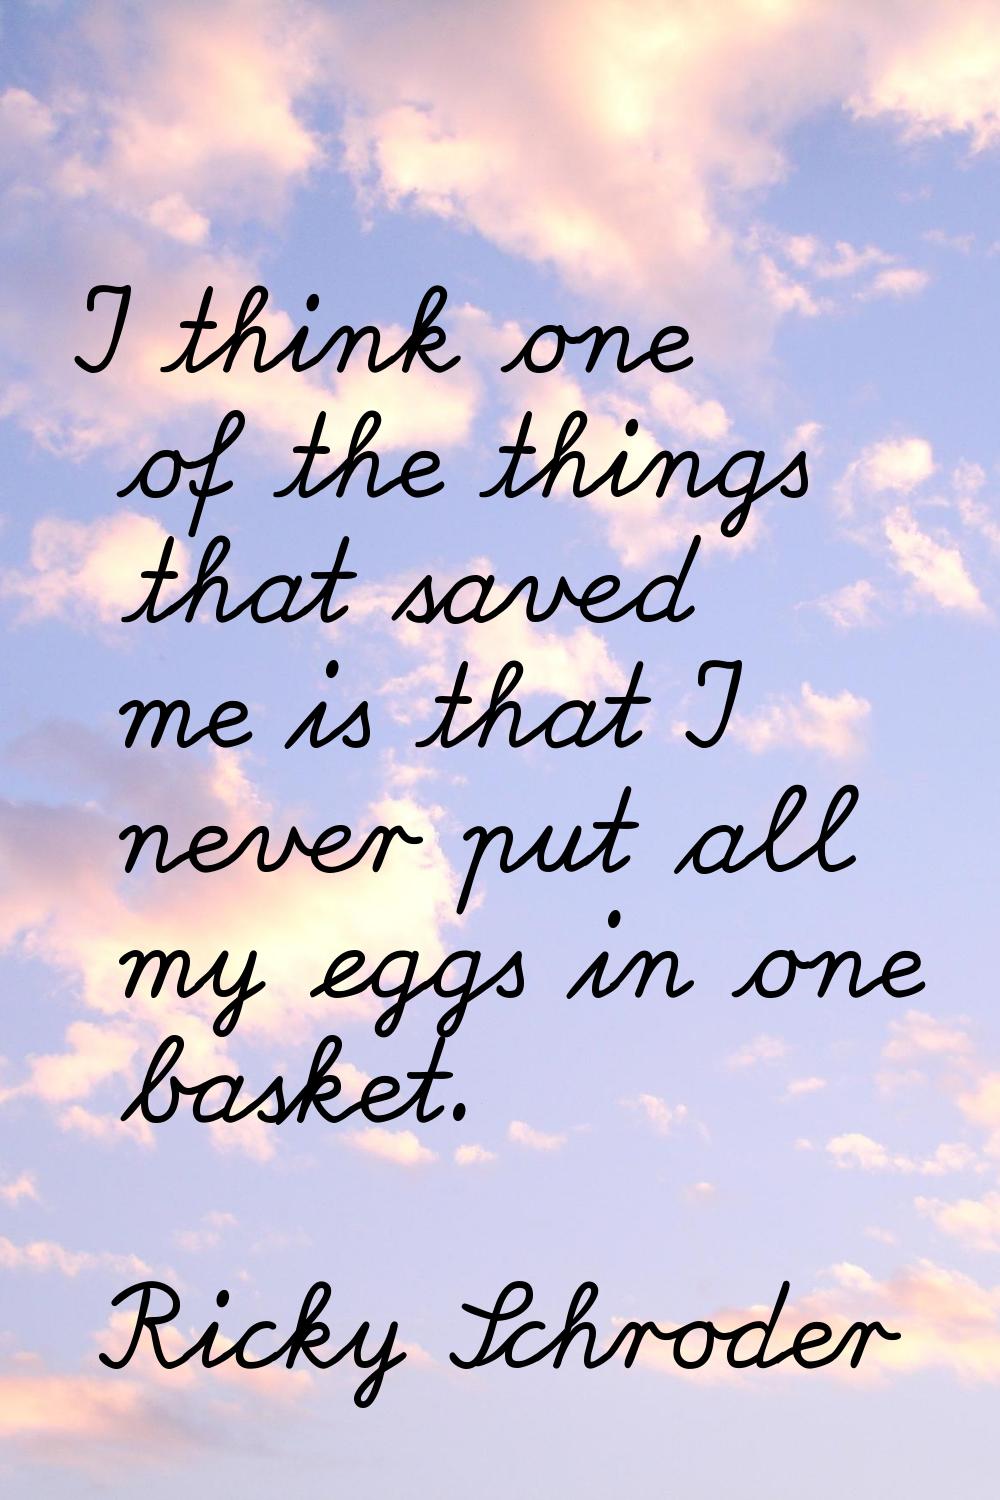 I think one of the things that saved me is that I never put all my eggs in one basket.